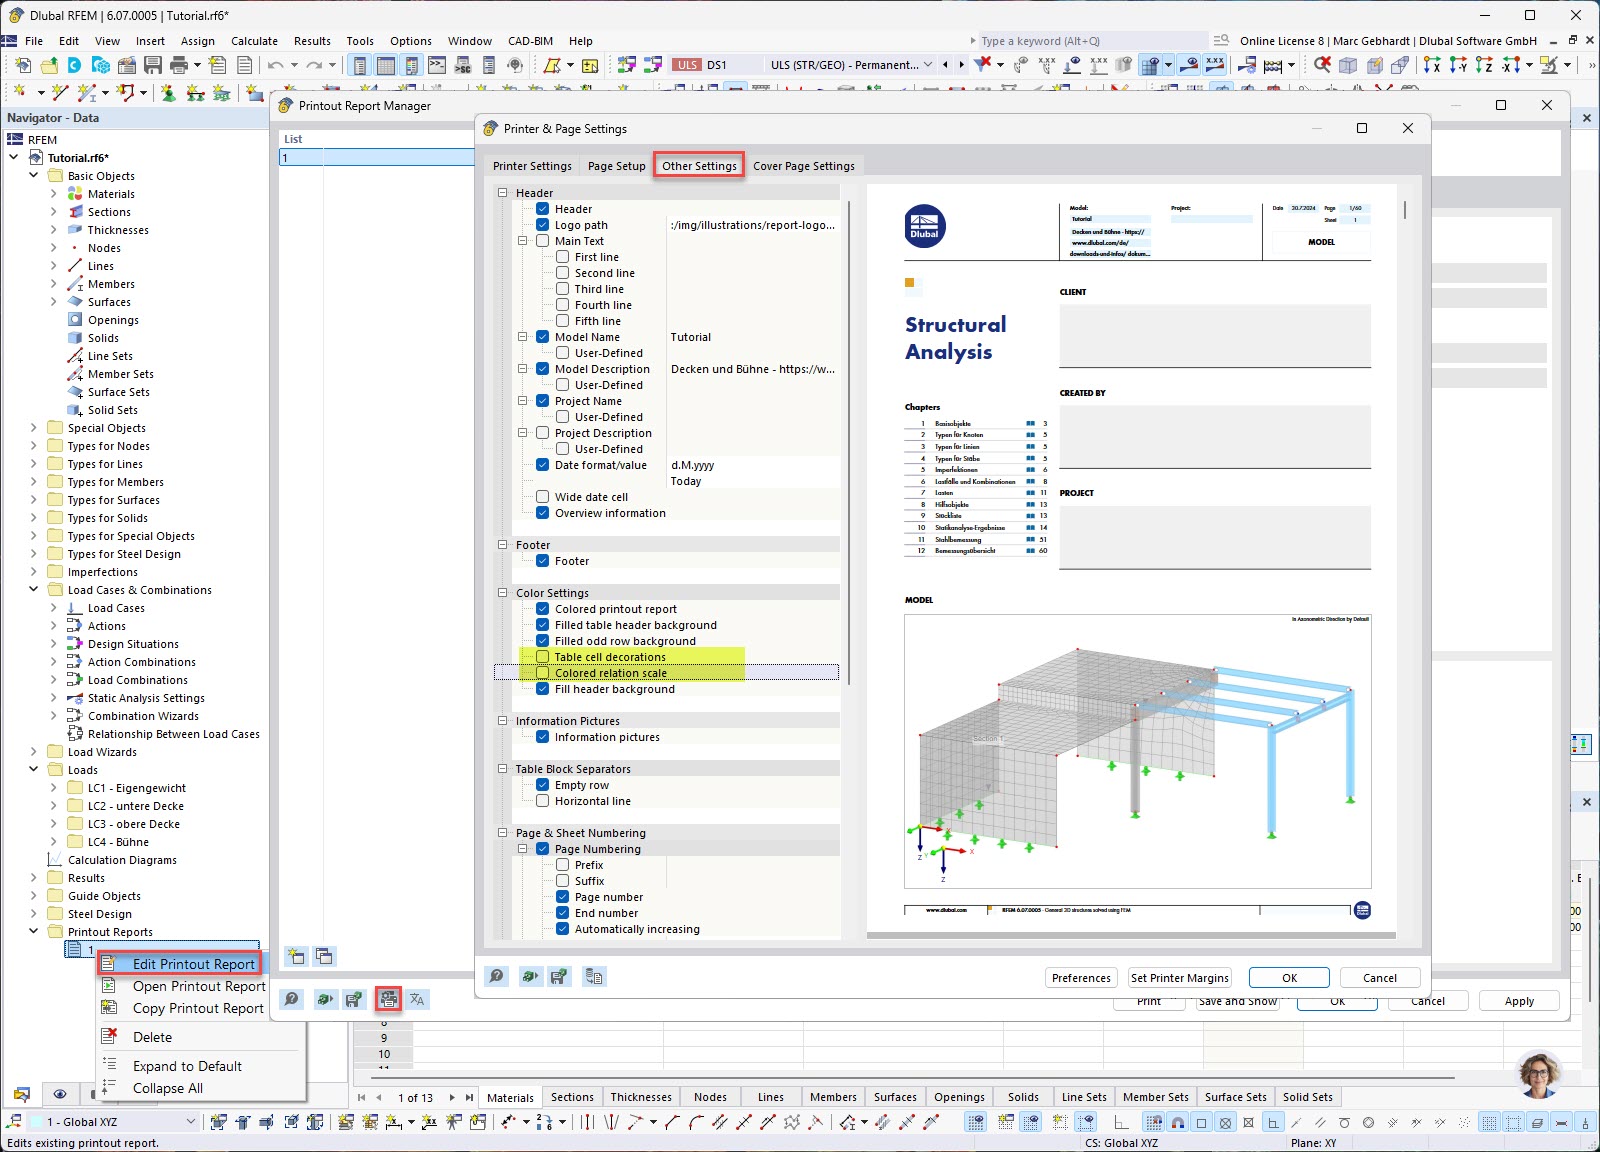 FAQ 005580 | Is it possible to reduce the memory requirements of a printout report in RFEM 6 and RSTAB 9?